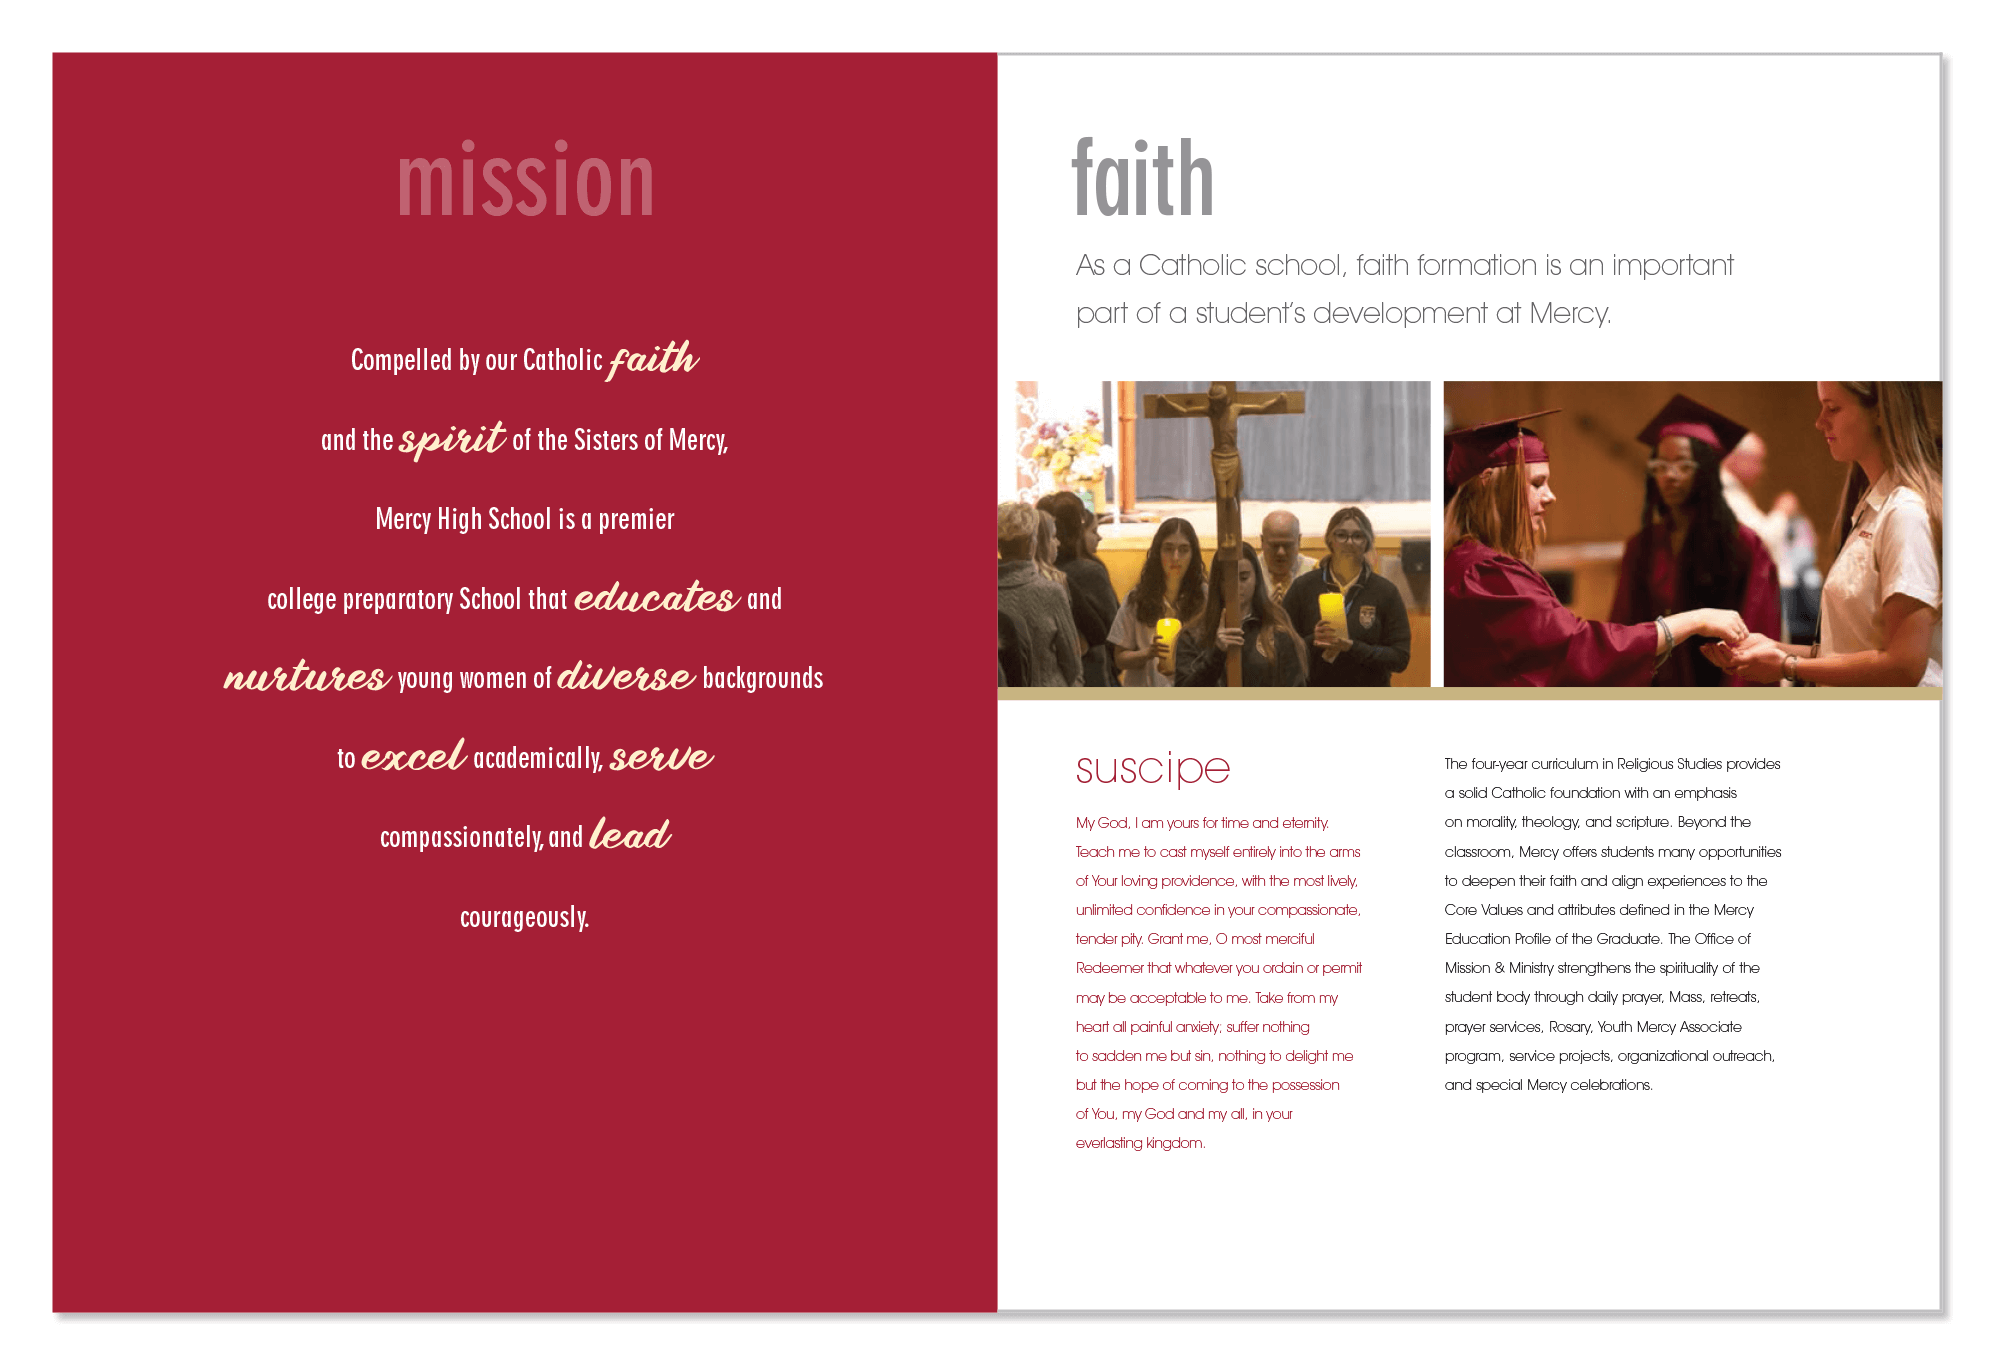 admissions brochure mission and faith pages